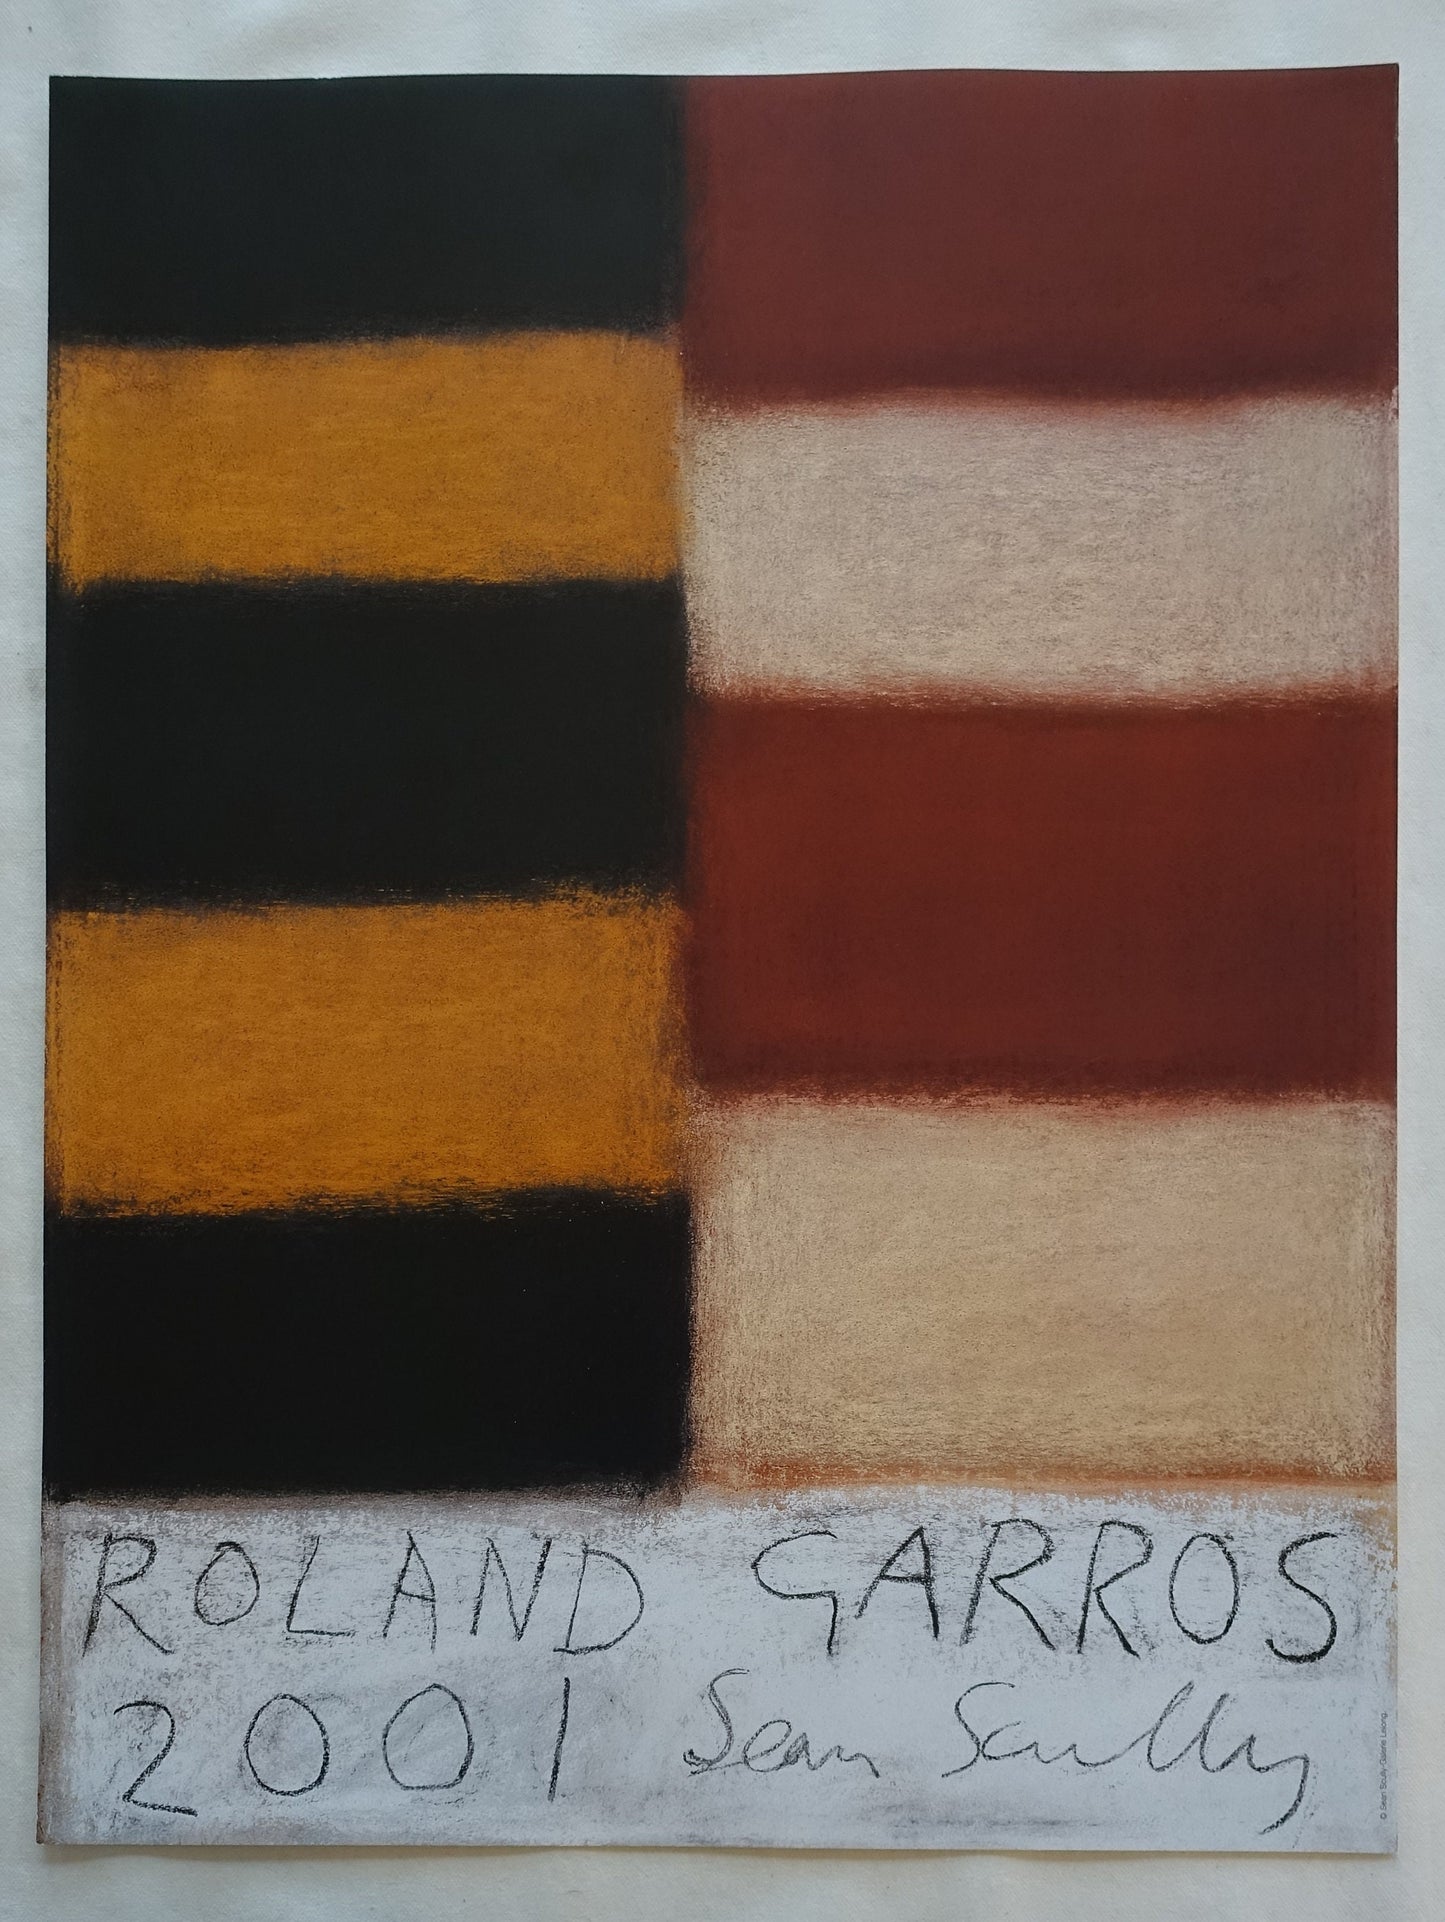 2001 Roland Garros French Open Poster by Sean Scully - Original Vintage Poster